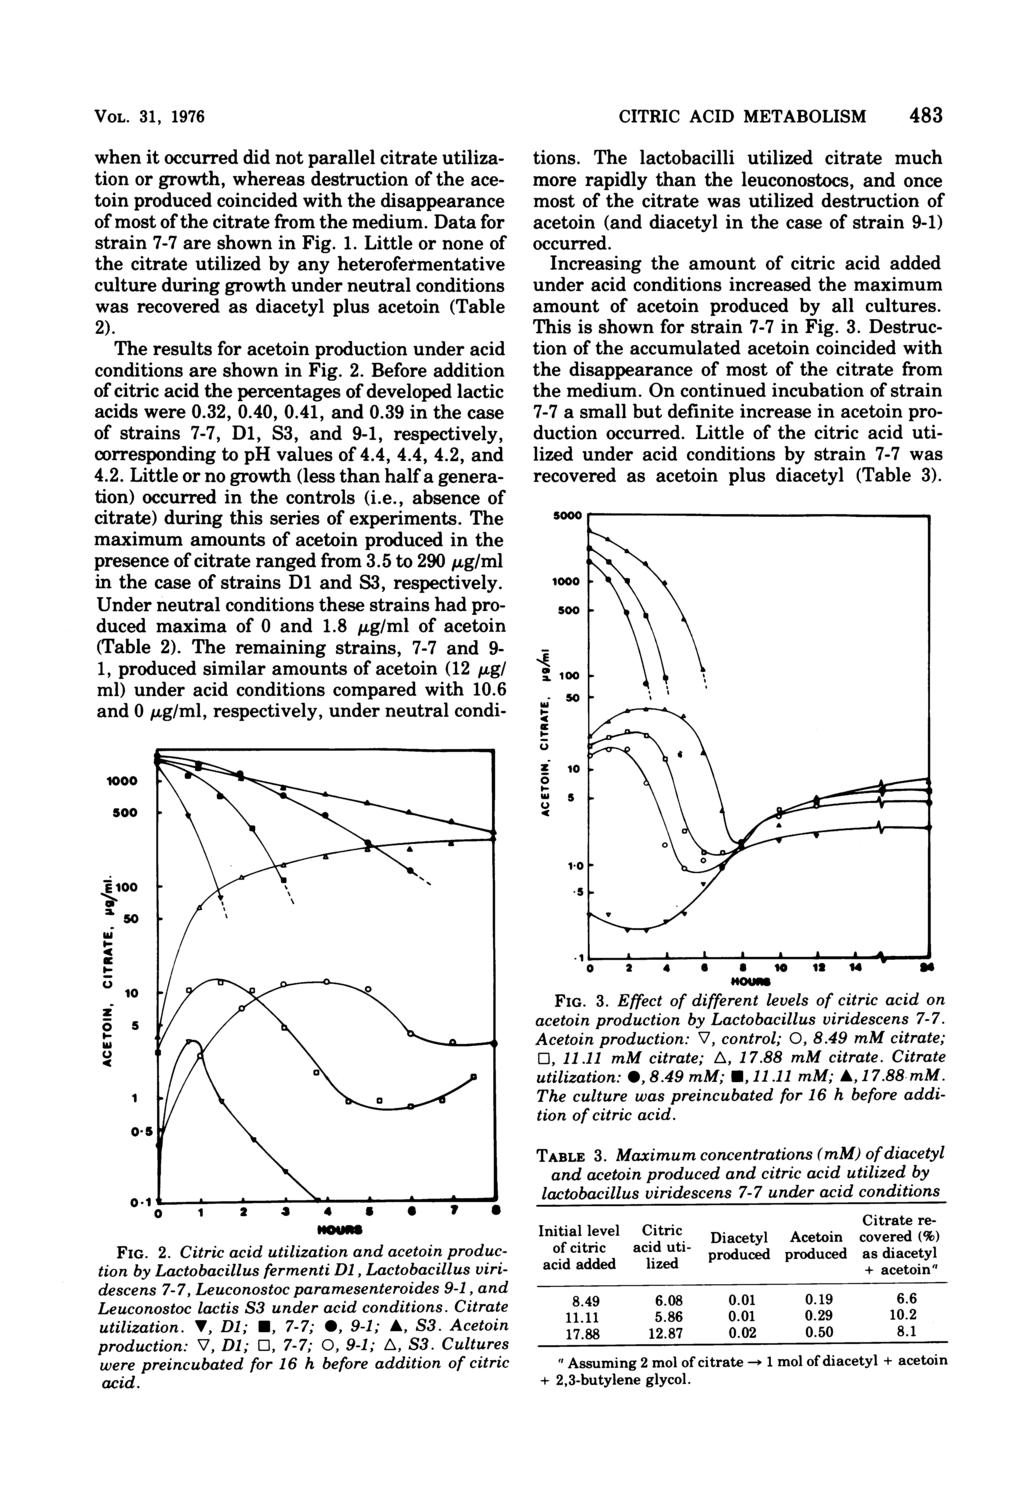 VOL. 31, 1976 1000 soo E100 z o when it occurred did not parallel citrate utilization or growth, whereas destruction of the acetoin produced coincided with the disappearance of most of the citrate